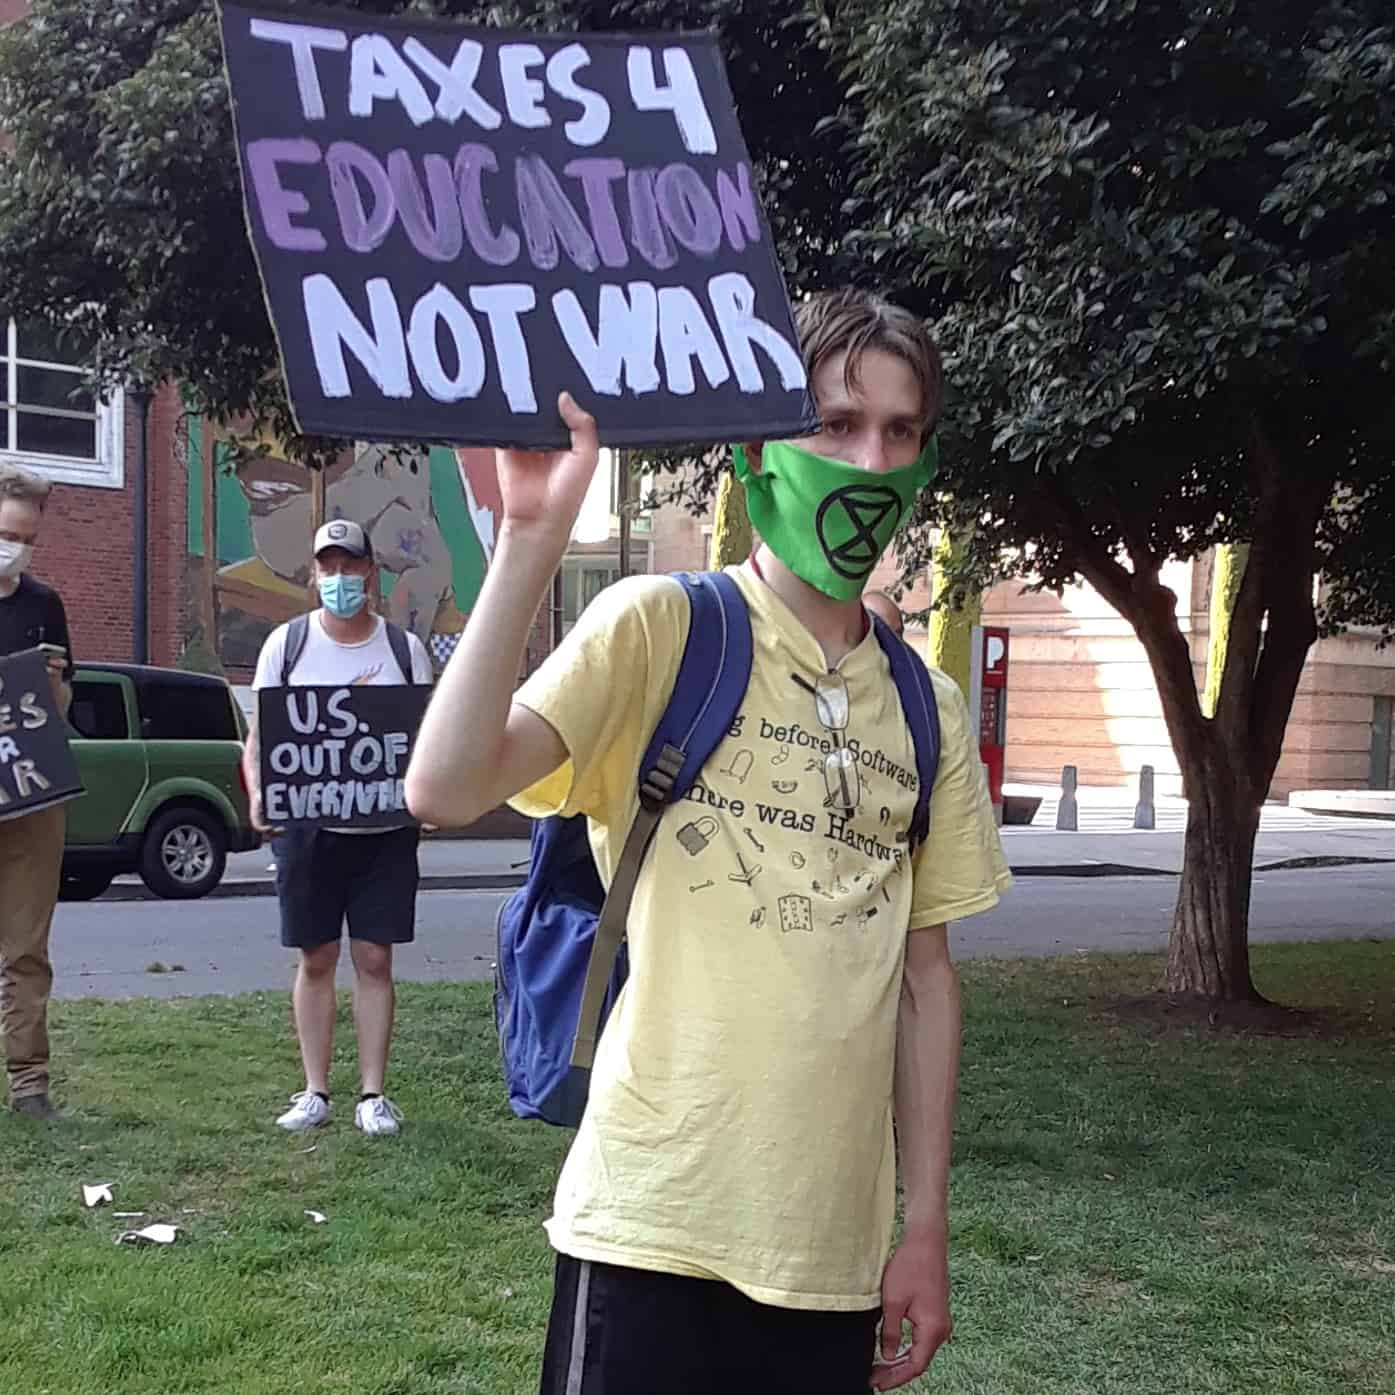 Protester sign: Taxes for education, not war.